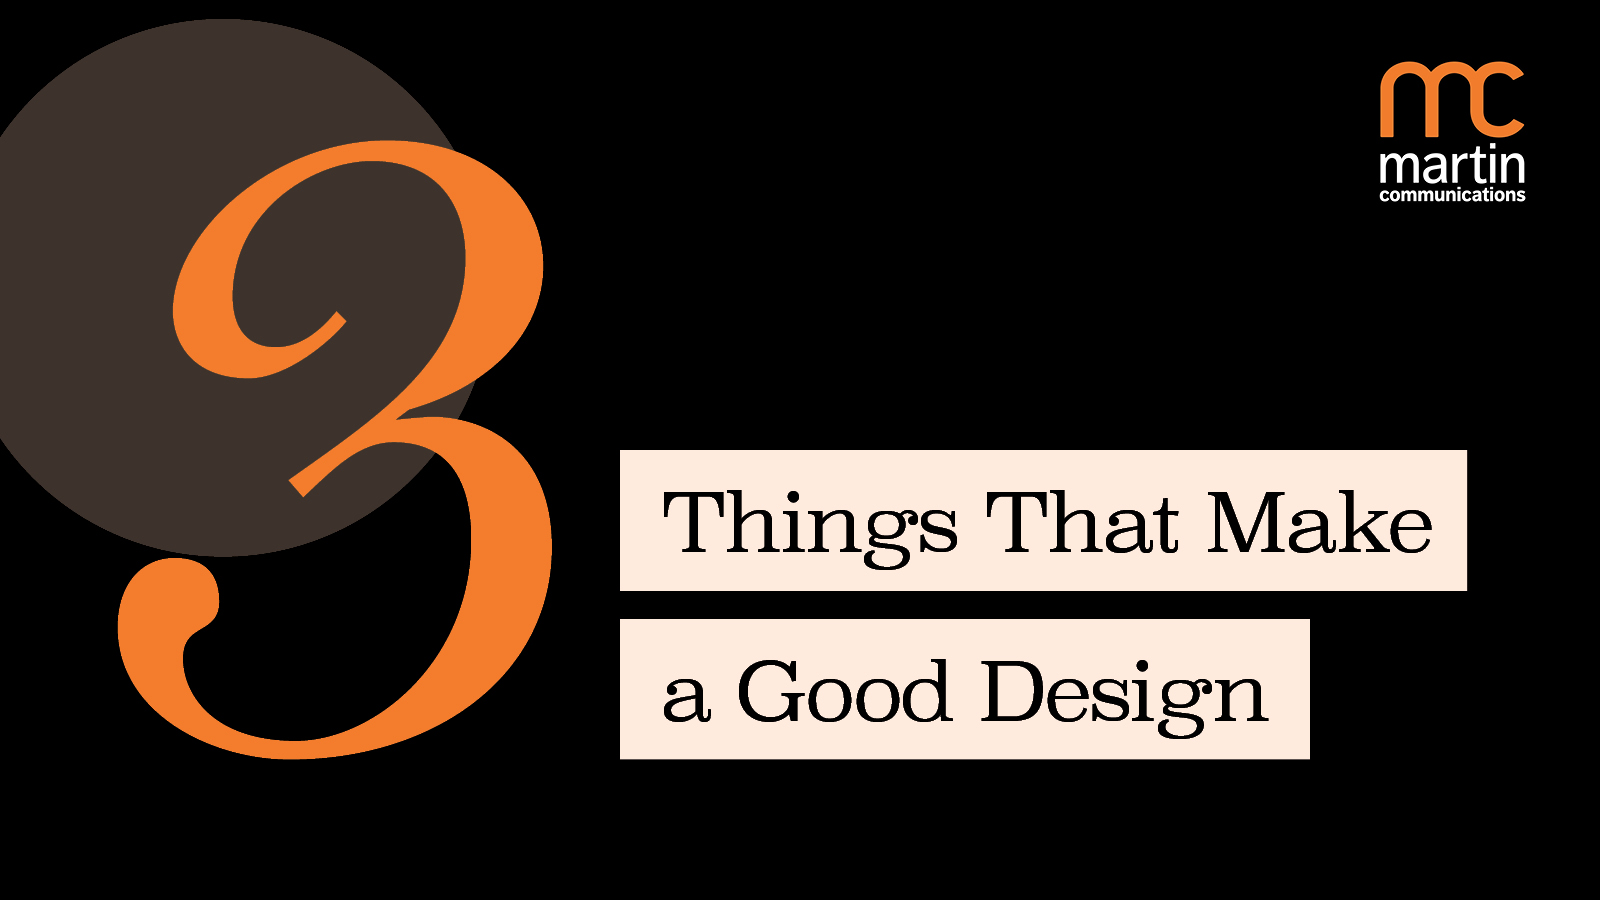 The 3 things that make a good design